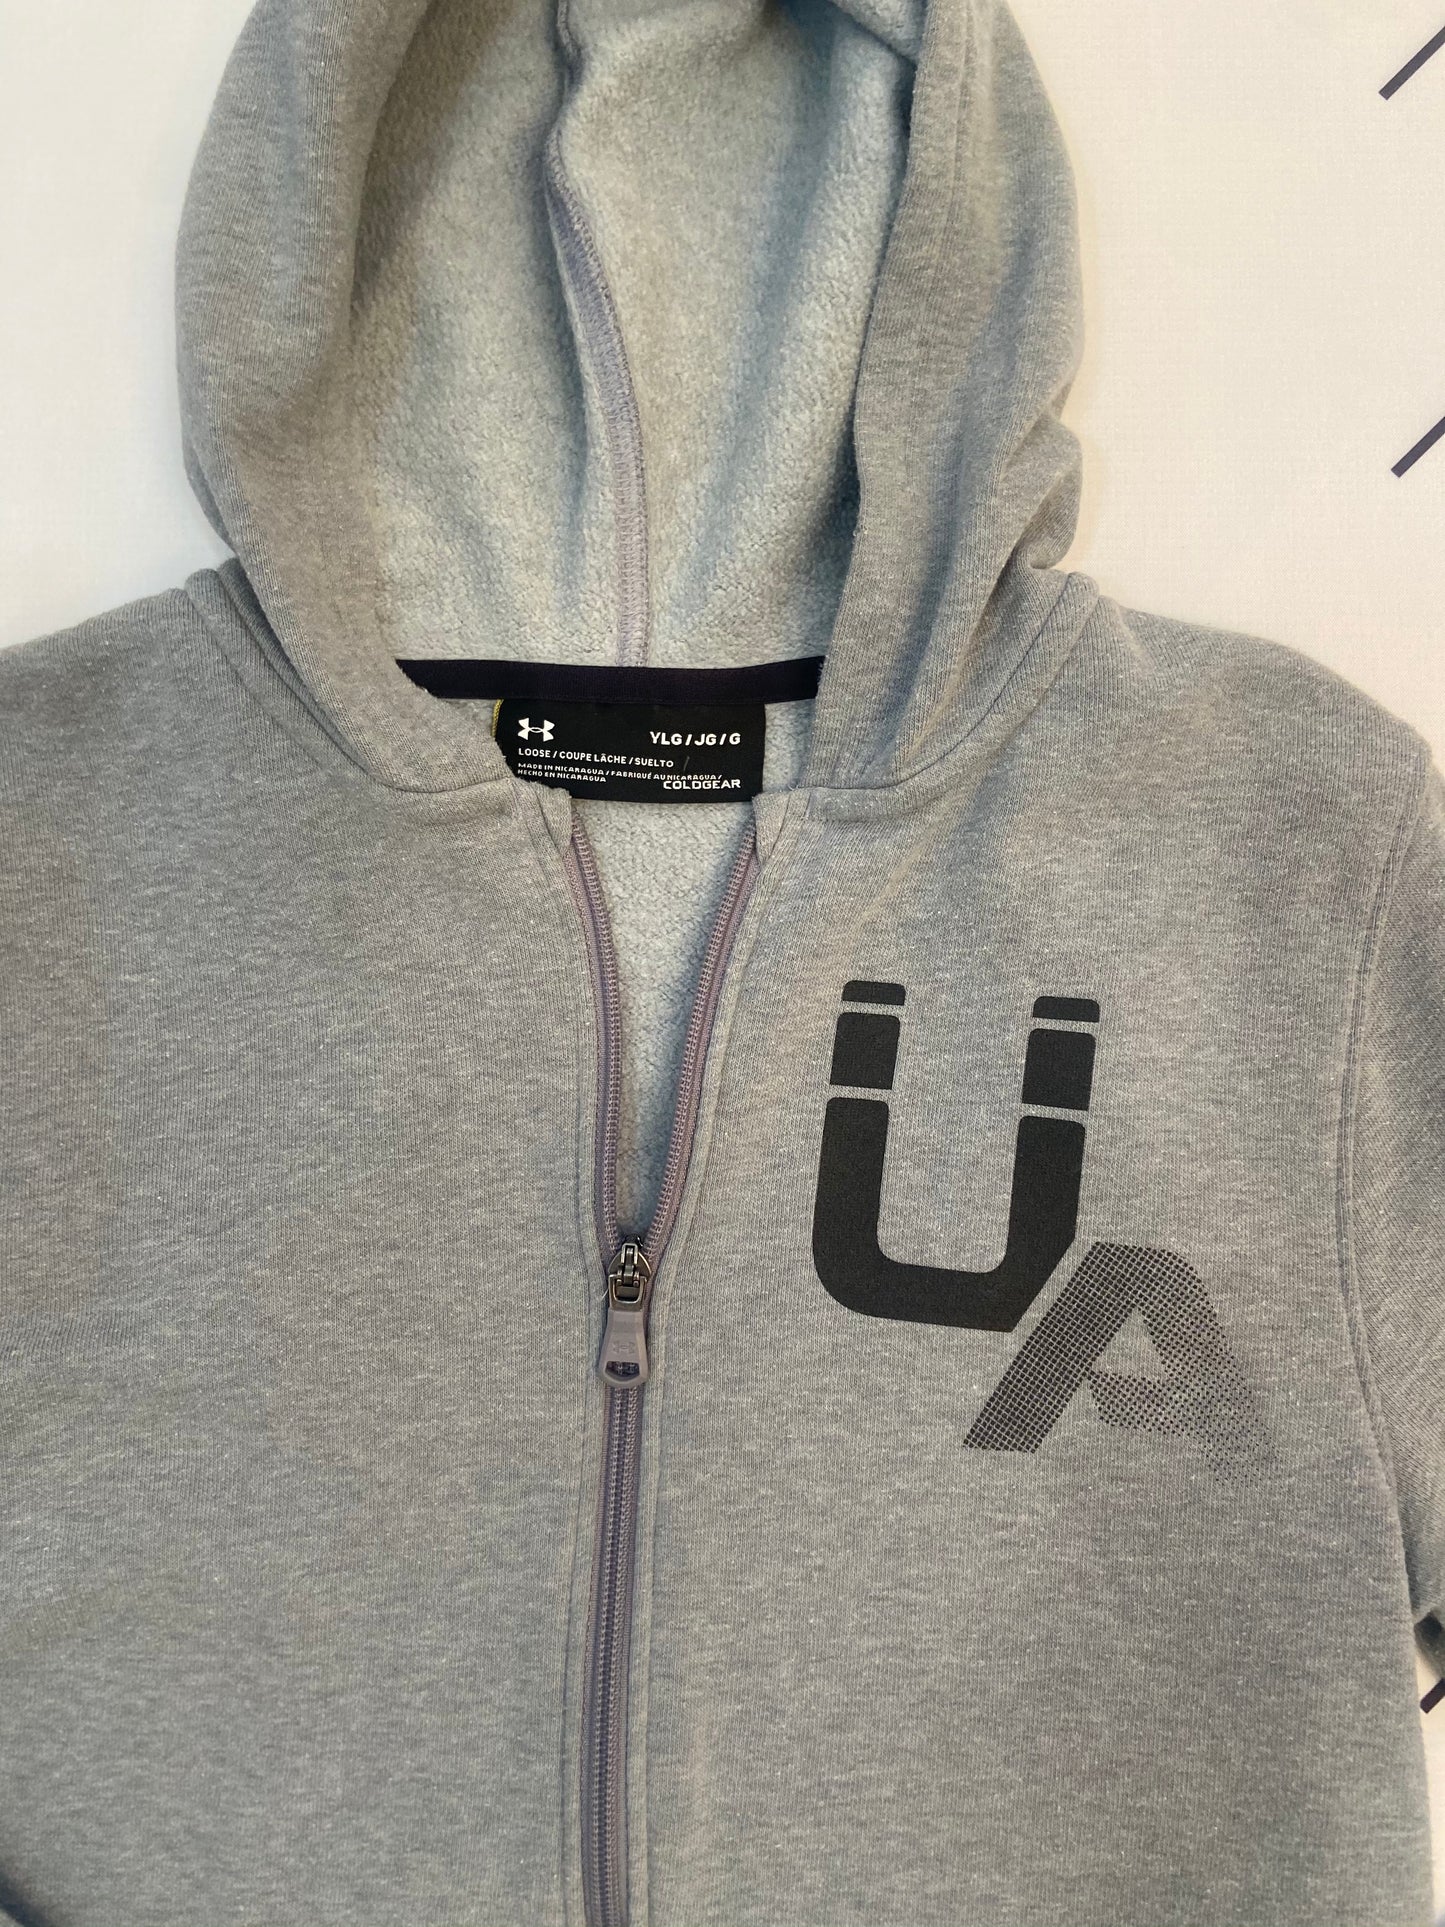 Under Armor Zip up - Youth L